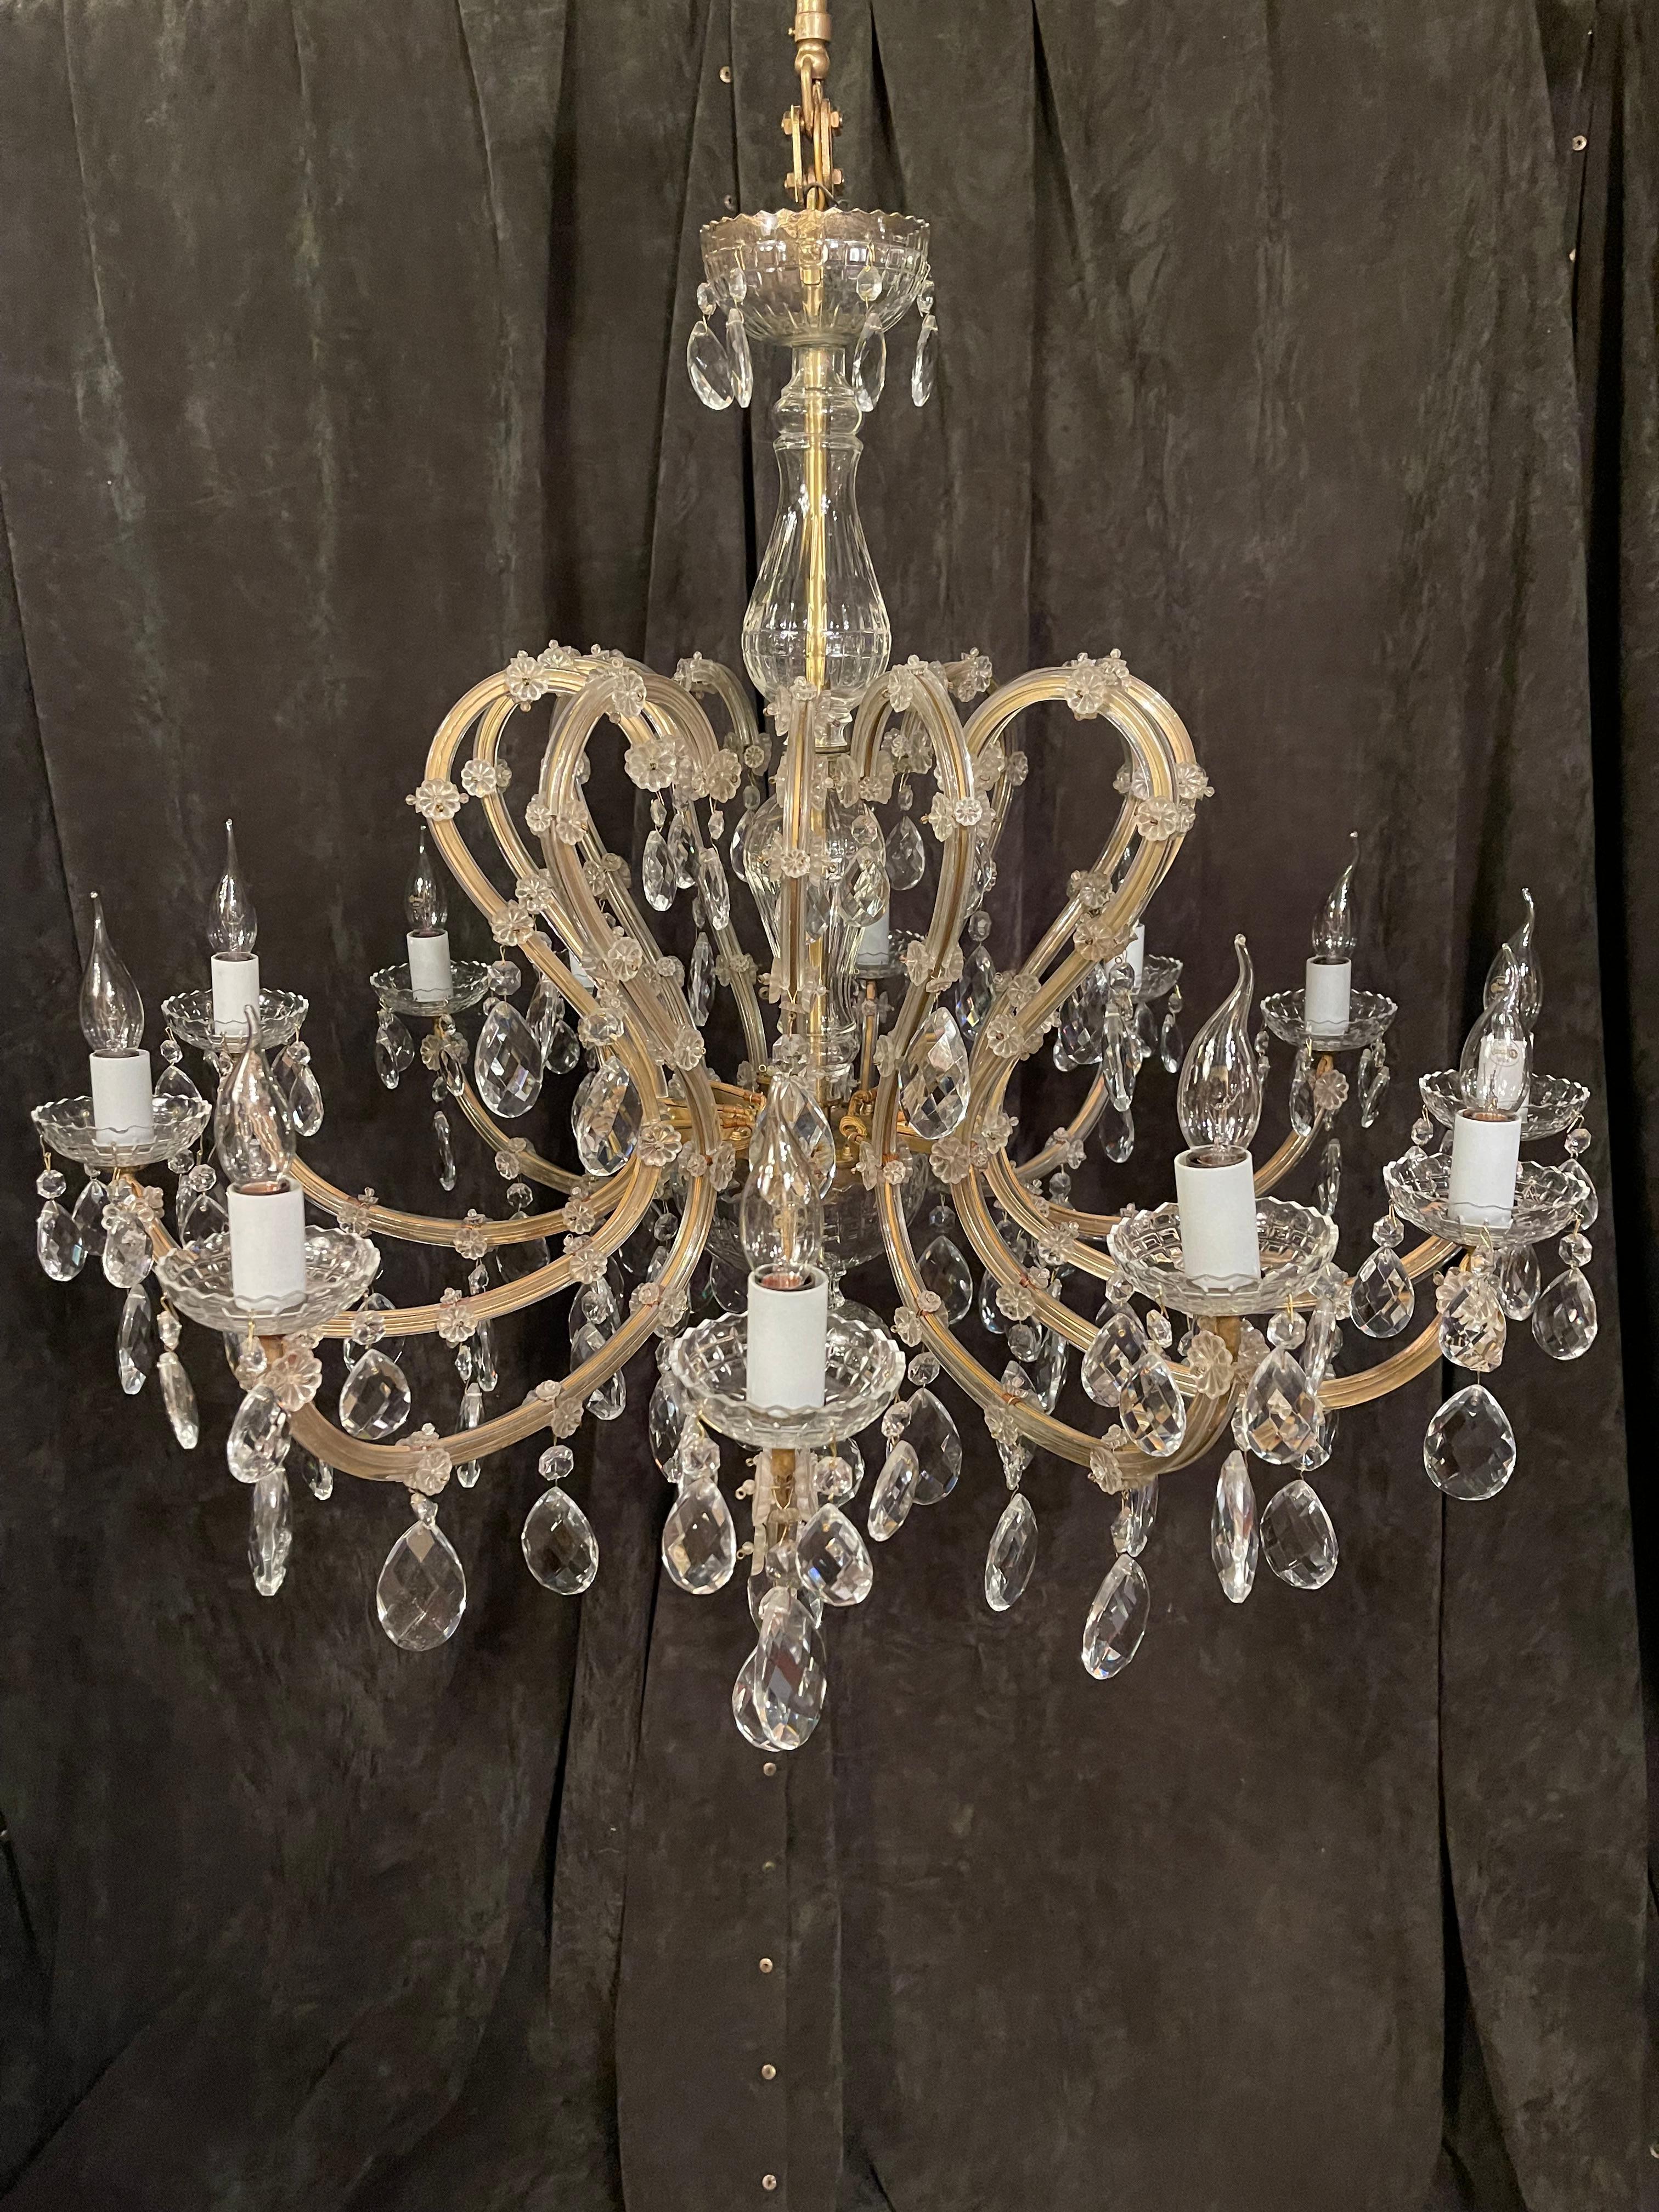 Fantastically beautiful chandelier crystal brass

Impressive chandelier, richly faceted. Wide body with 12 light arms. Each with a crystal plate below the light bulb socket. Tested for full electrical function.

High luminosity. Extremely